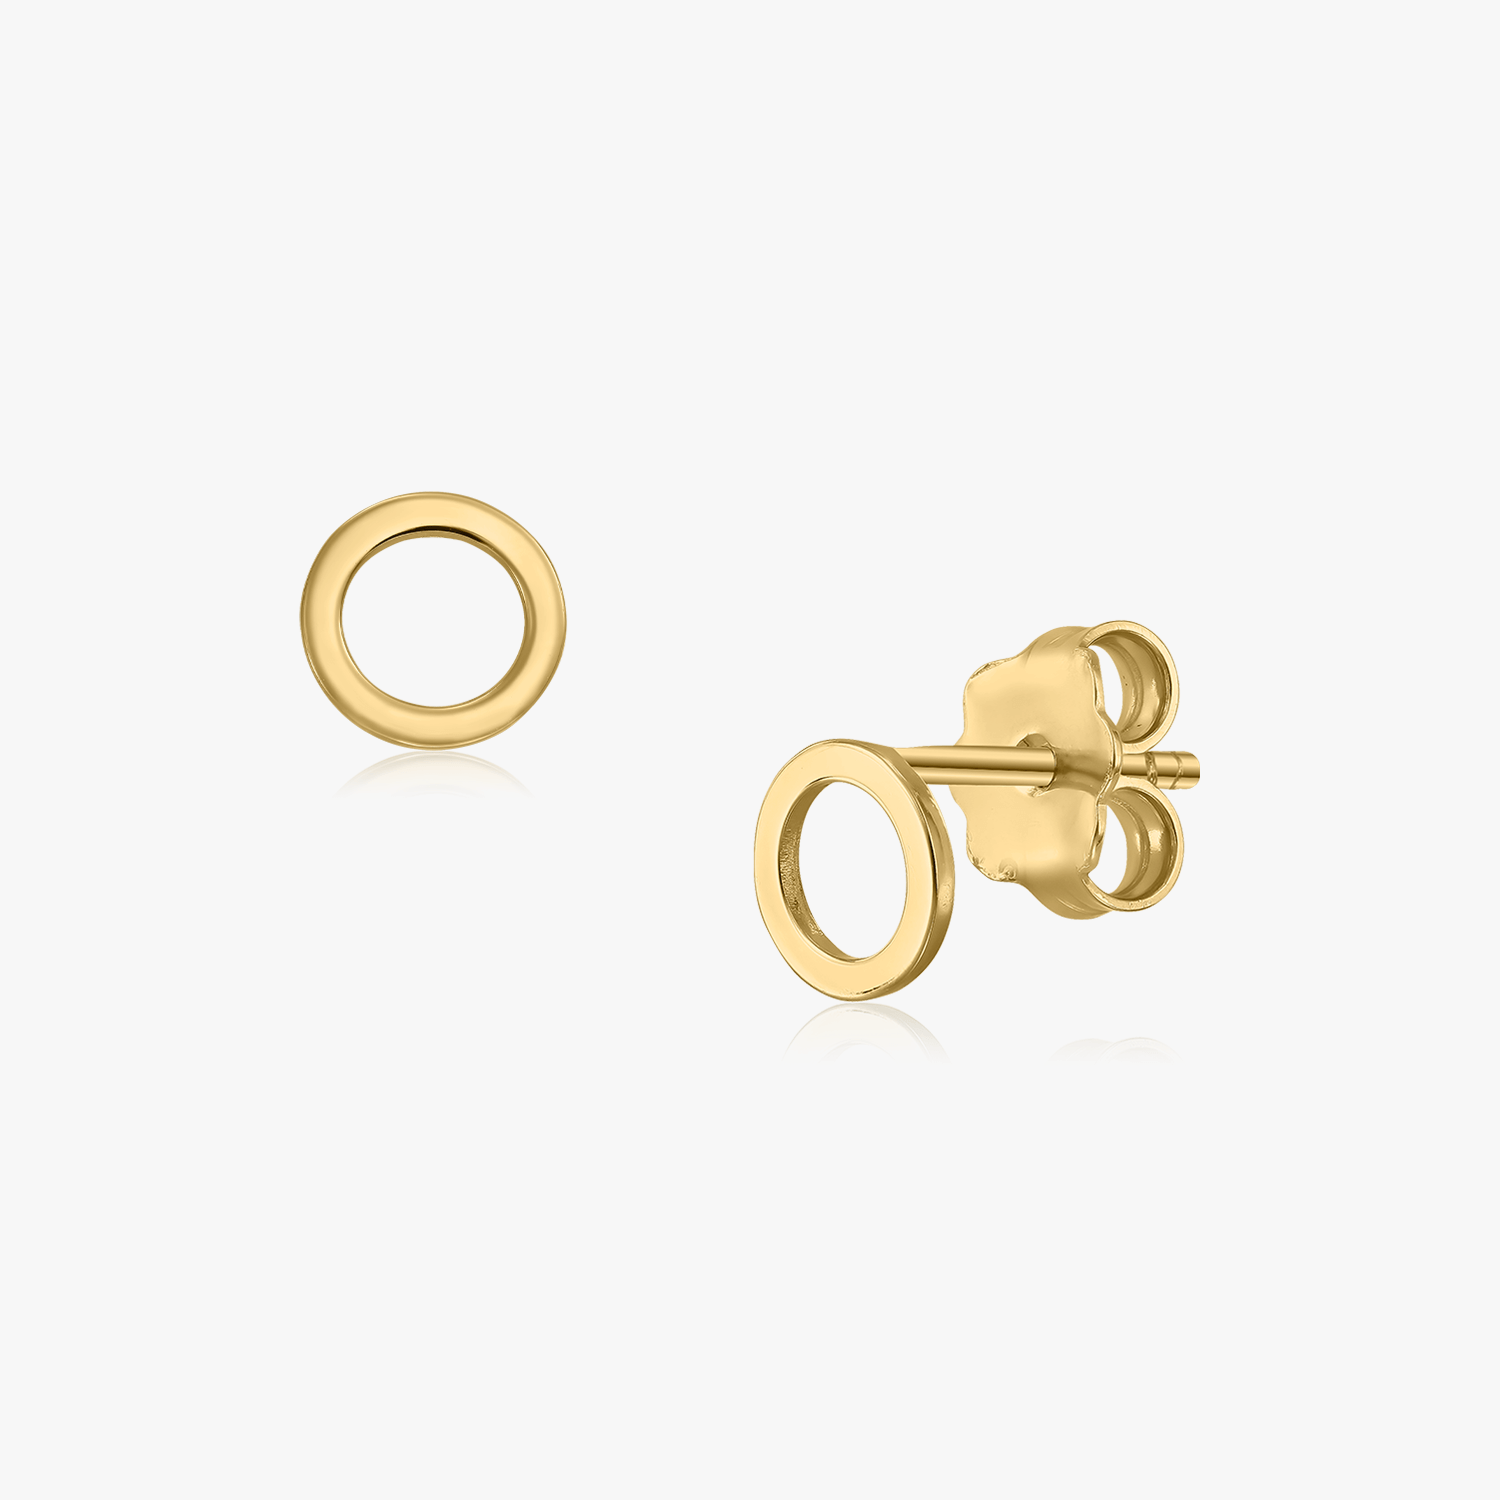 Small Circle gold earrings